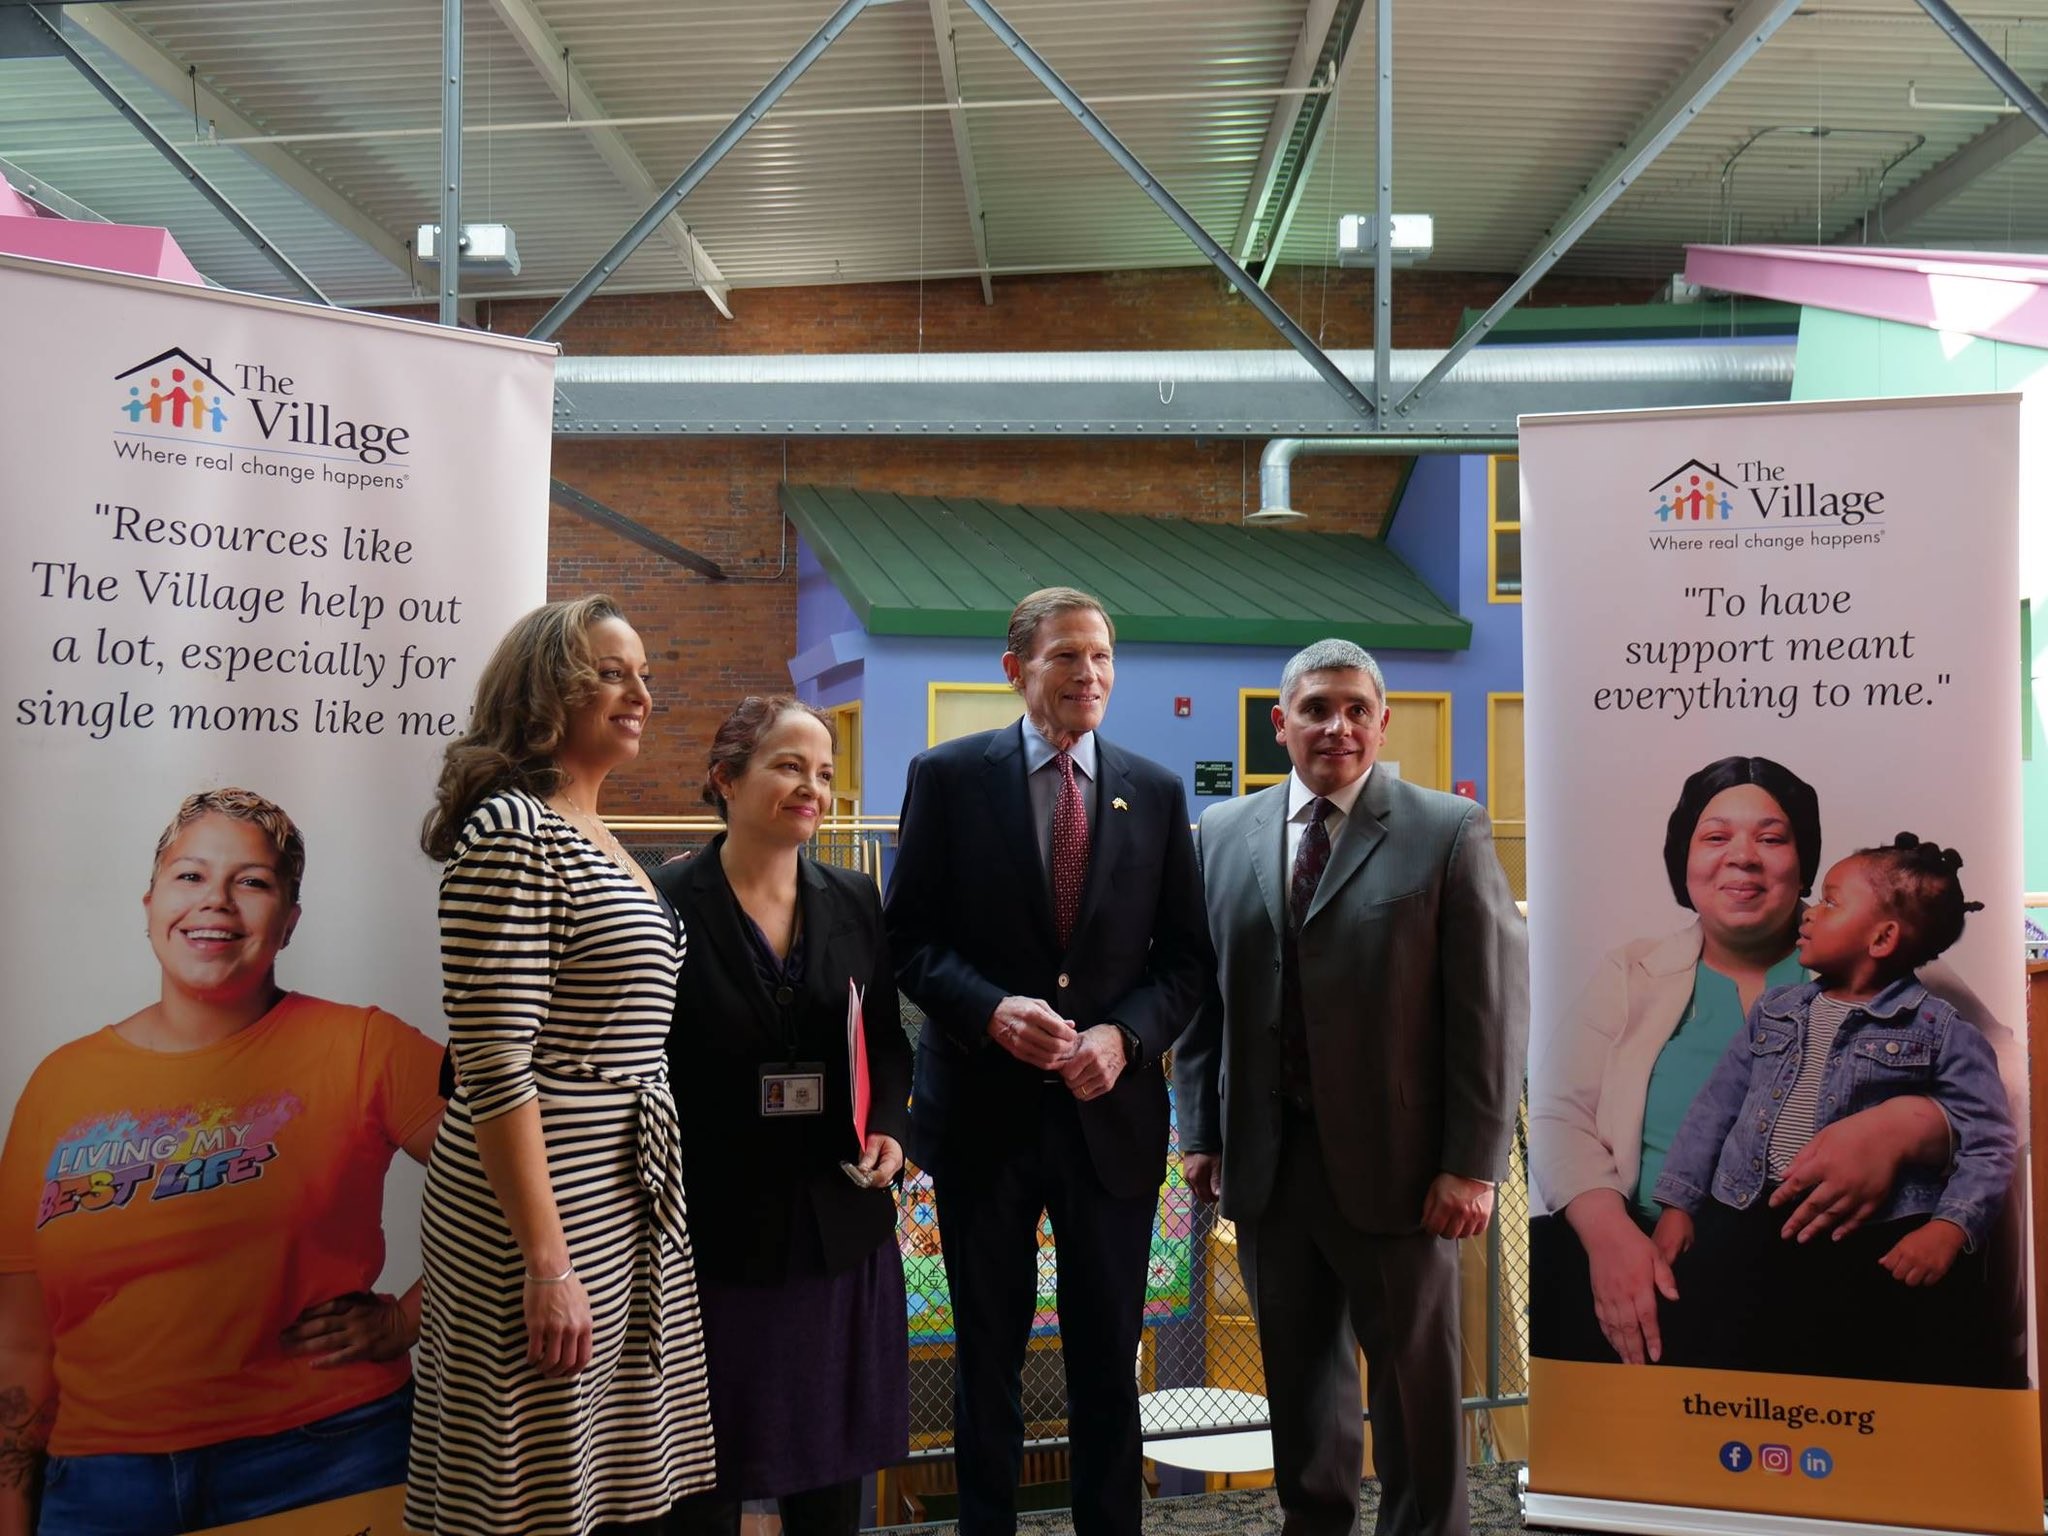 Blumenthal visited The Village for Families & Children in Hartford to discuss the need for bipartisan legislation to protect kids’ privacy and safety online.